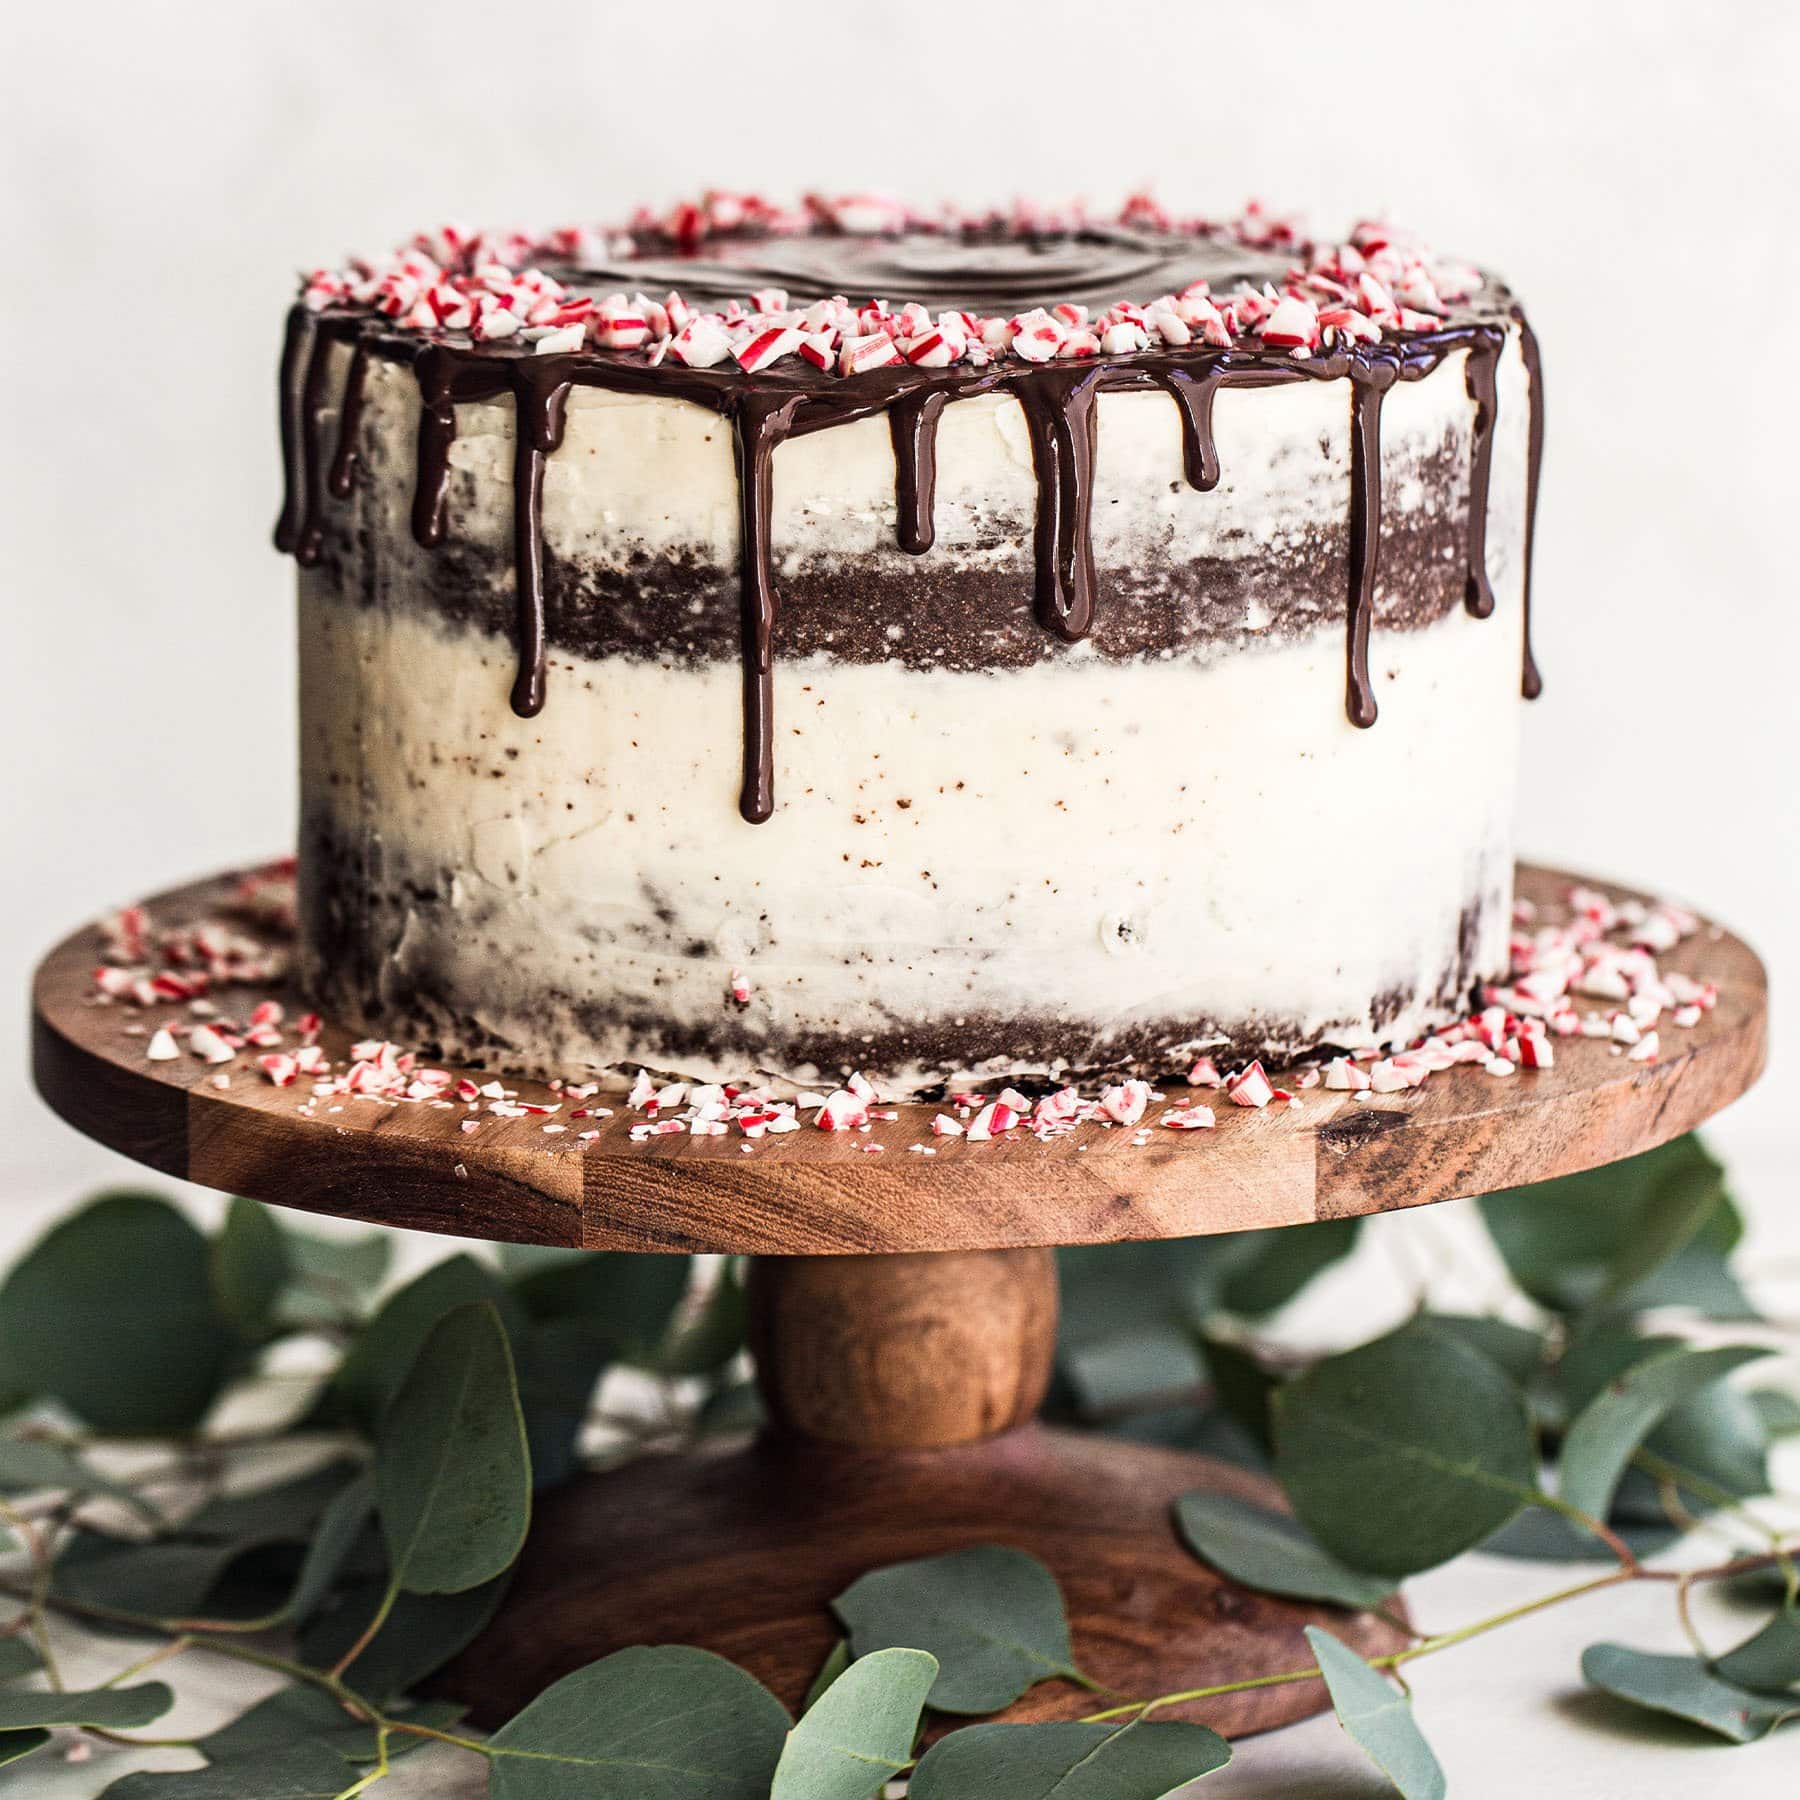 peppermint chocolate cake with buttercream and chocolate drip on a cake stand